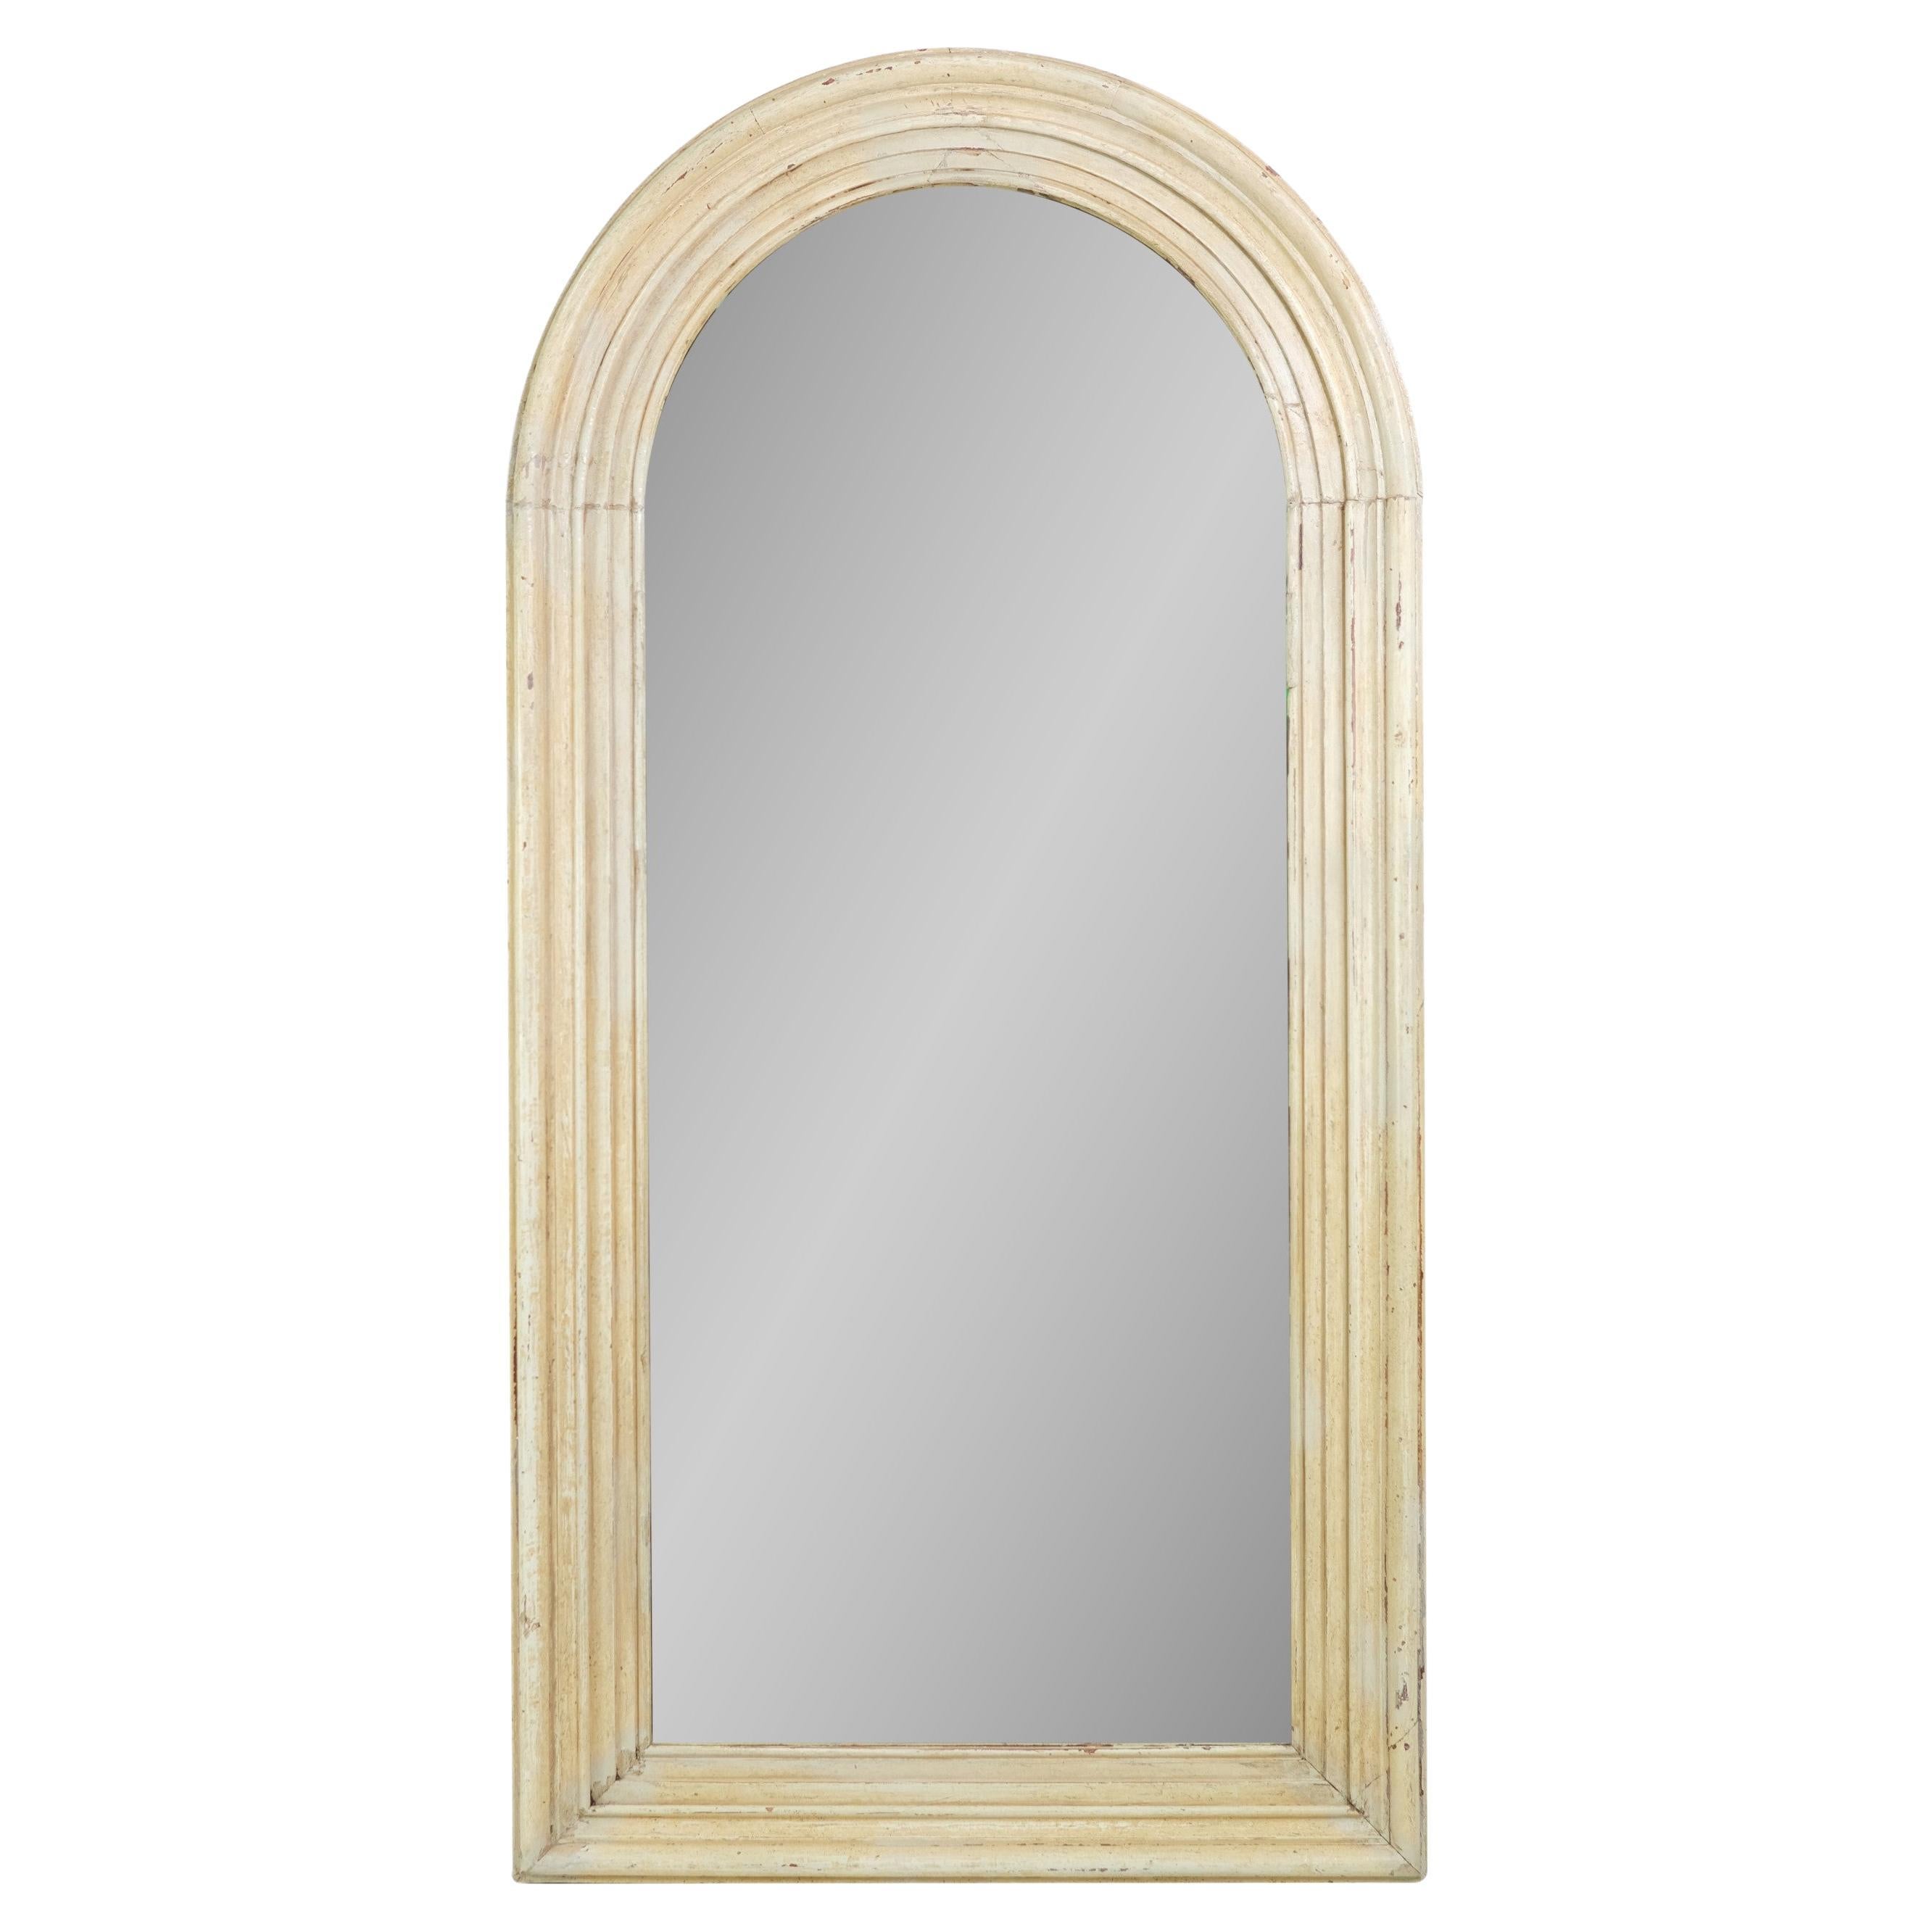 Upcycled 1800s Entry Door Wood Molding Mirror Arched Top